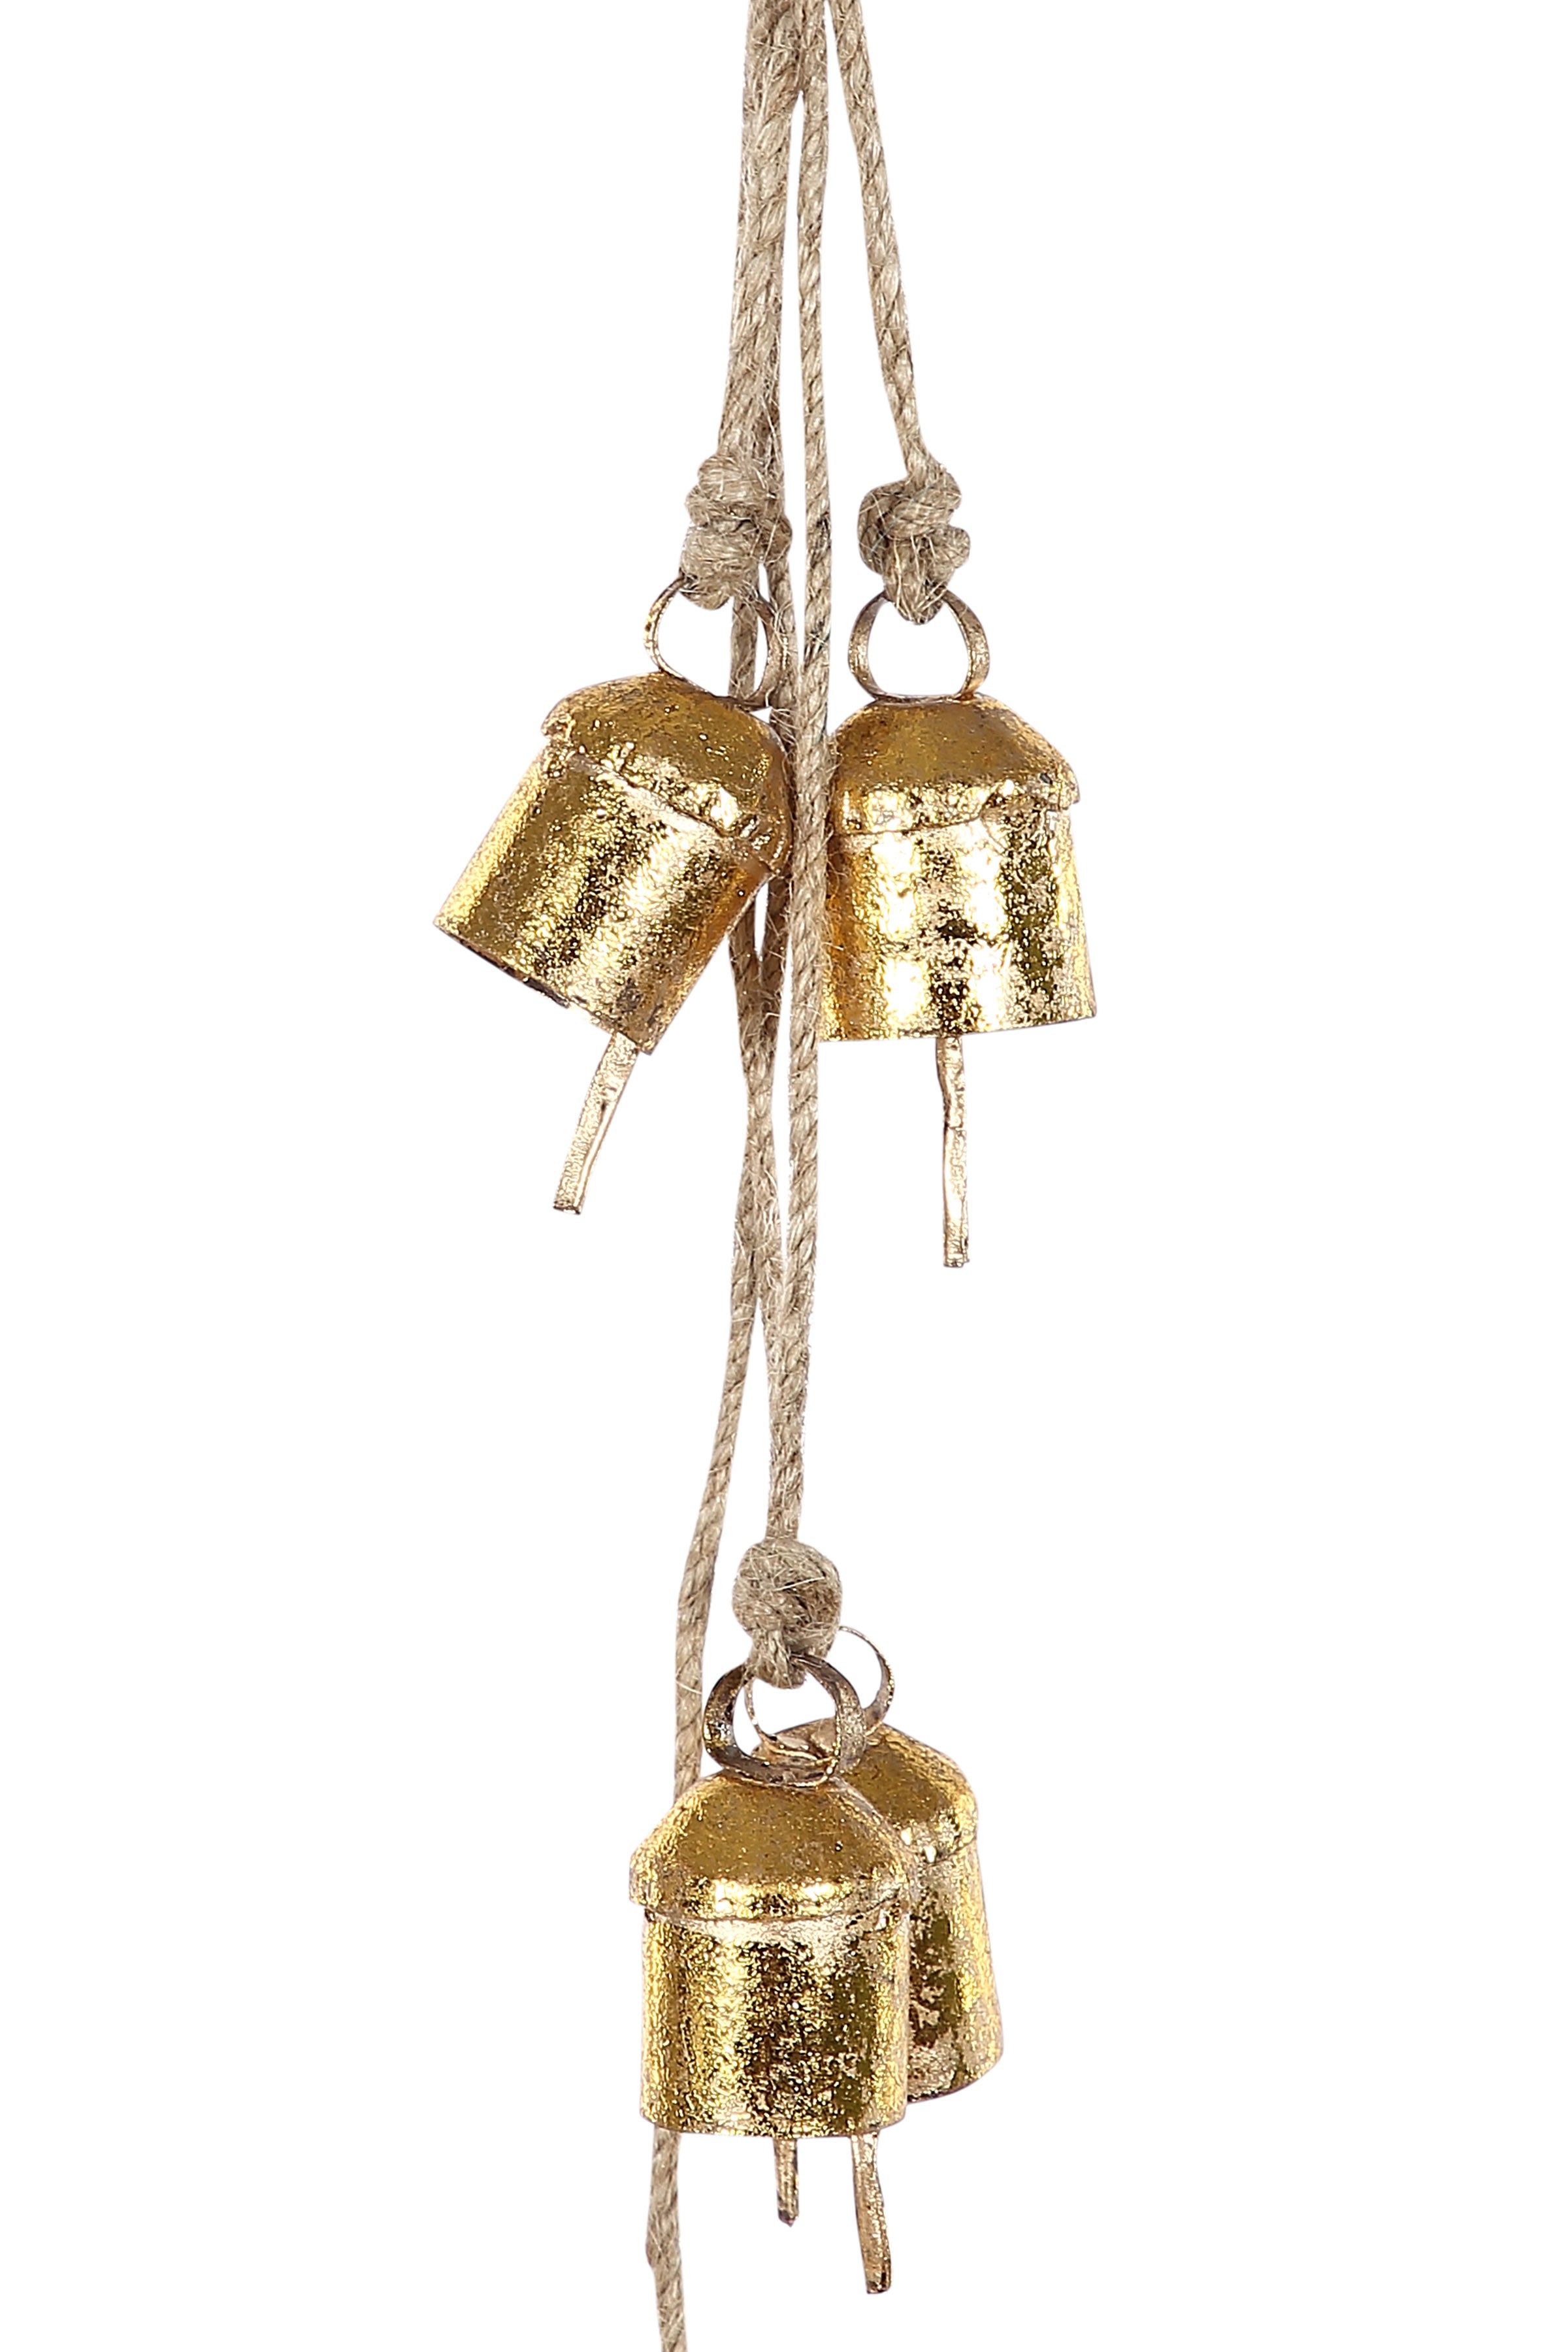 Recycled Iron 5 Bells Wind Chimes with Jute Strings-20inch (Set of 3)